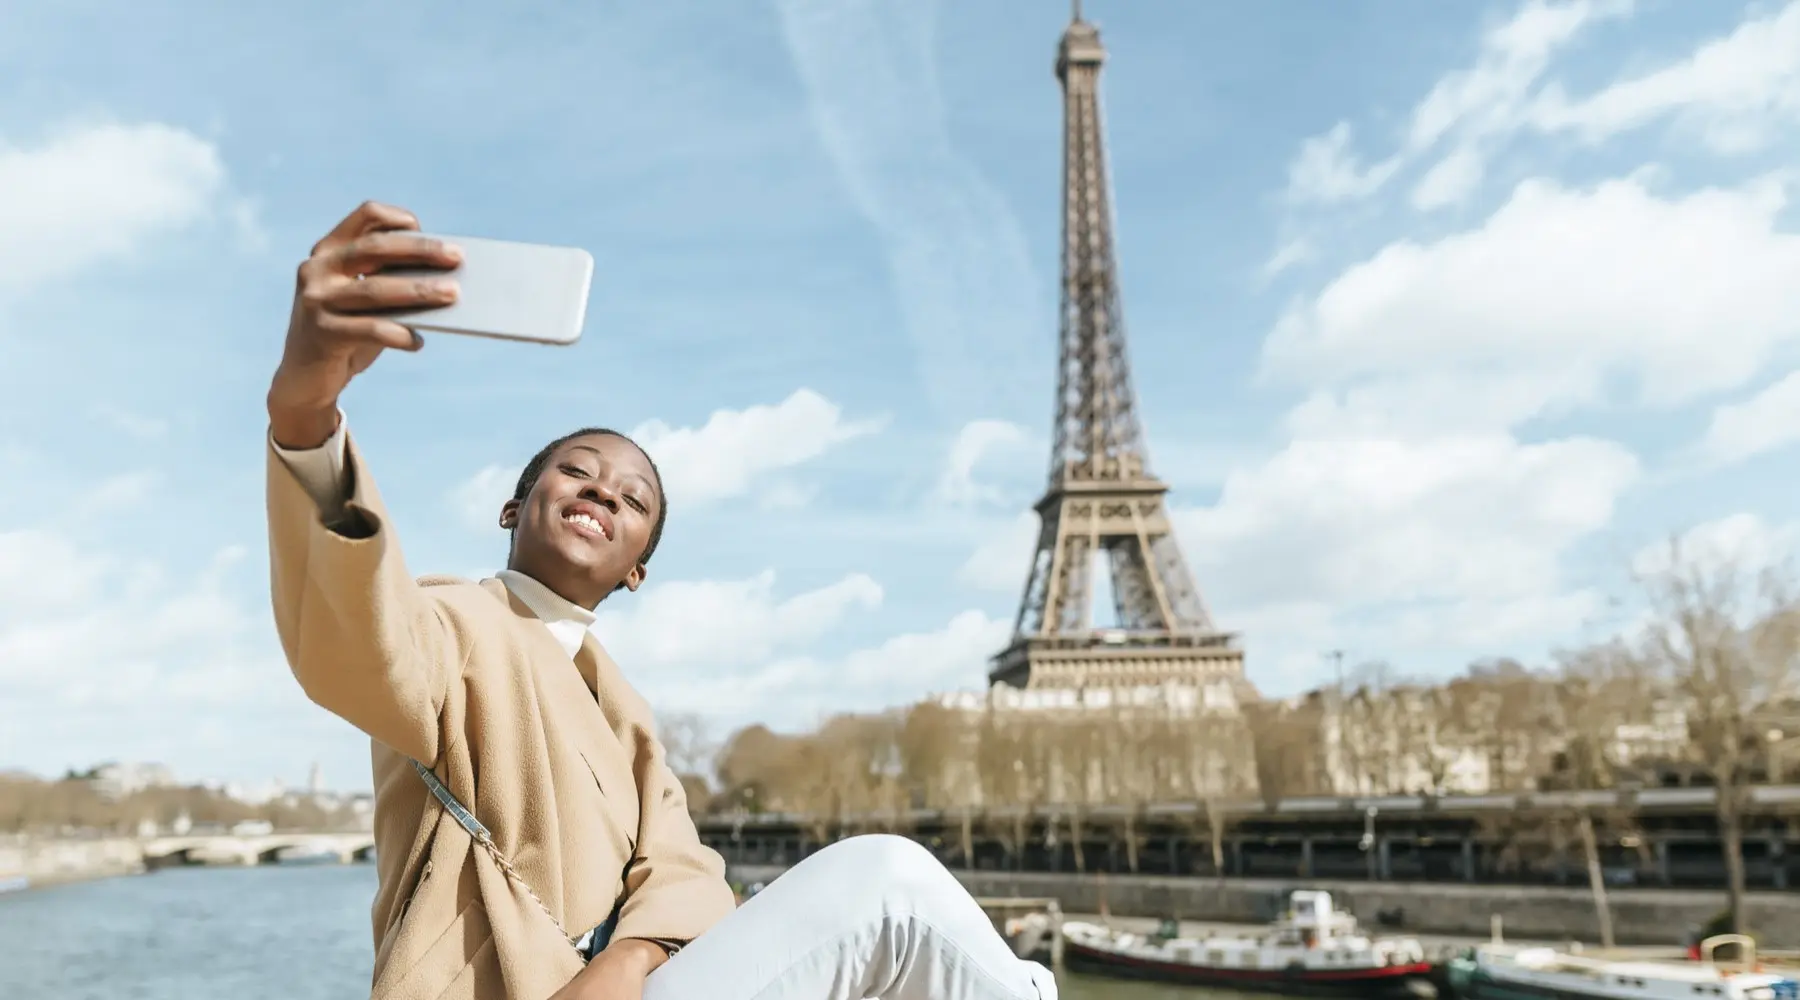 Woman taking selfie in front of the Eiffel Tower